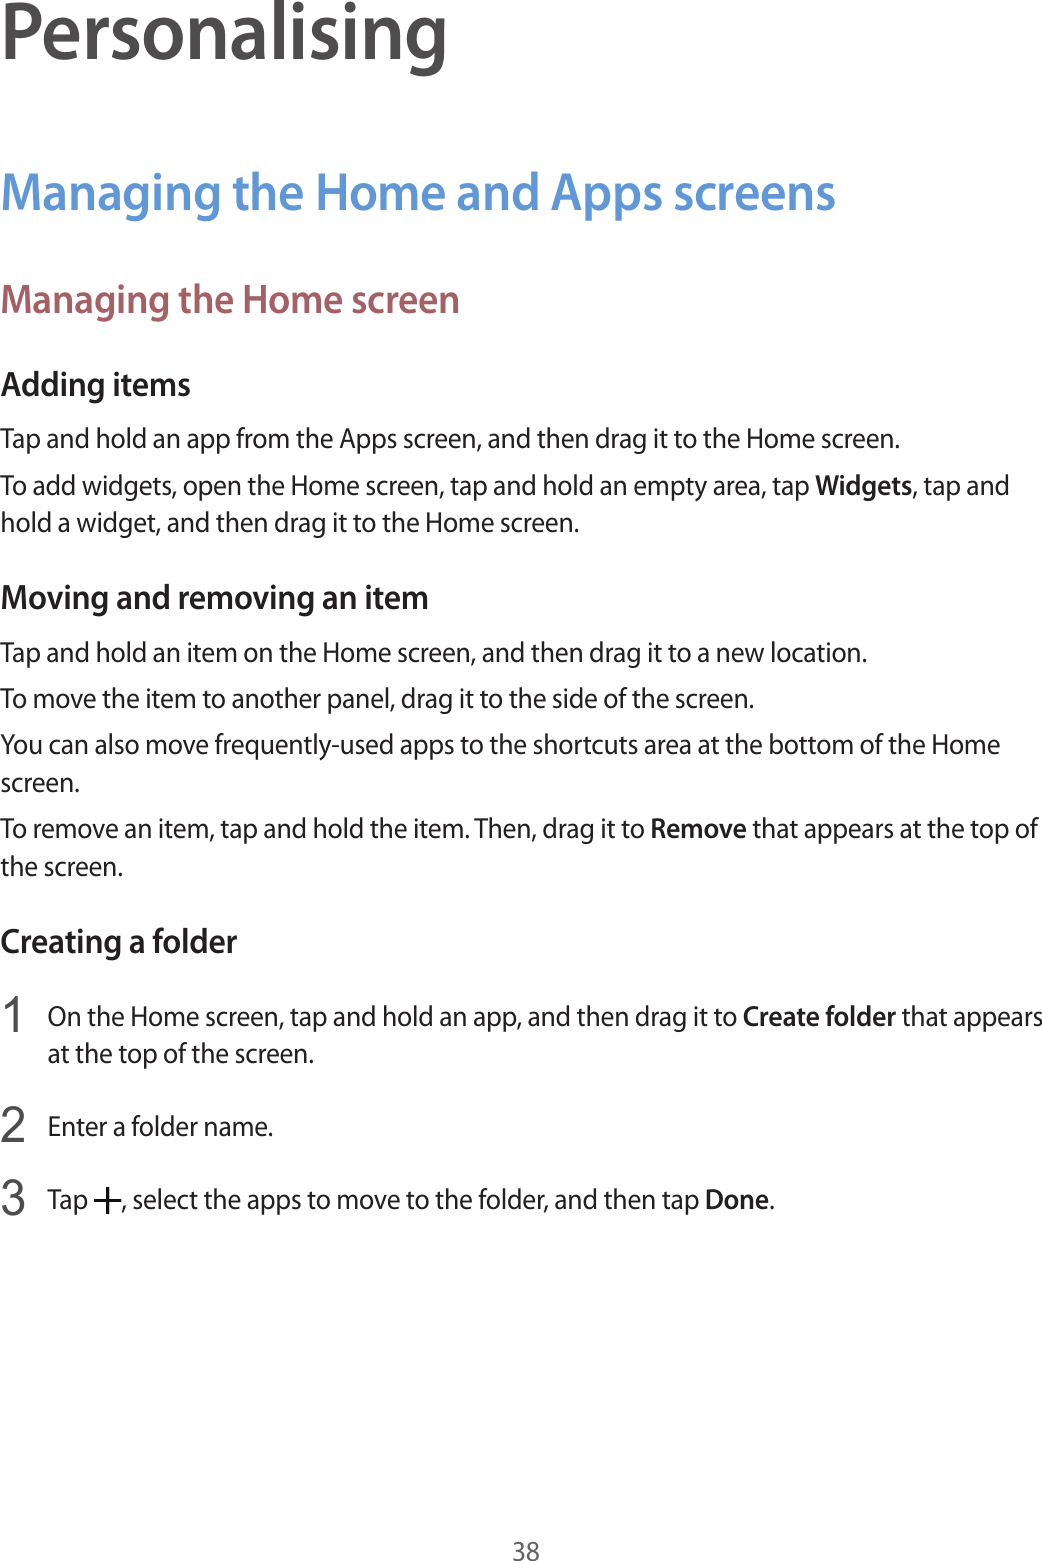 38PersonalisingManaging the Home and Apps screensManaging the Home screenAdding itemsTap and hold an app from the Apps screen, and then drag it to the Home screen.To add widgets, open the Home screen, tap and hold an empty area, tap Widgets, tap and hold a widget, and then drag it to the Home screen.Moving and removing an itemTap and hold an item on the Home screen, and then drag it to a new location.To move the item to another panel, drag it to the side of the screen.You can also move frequently-used apps to the shortcuts area at the bottom of the Home screen.To remove an item, tap and hold the item. Then, drag it to Remove that appears at the top of the screen.Creating a folder1  On the Home screen, tap and hold an app, and then drag it to Create folder that appears at the top of the screen.2  Enter a folder name.3  Tap  , select the apps to move to the folder, and then tap Done.